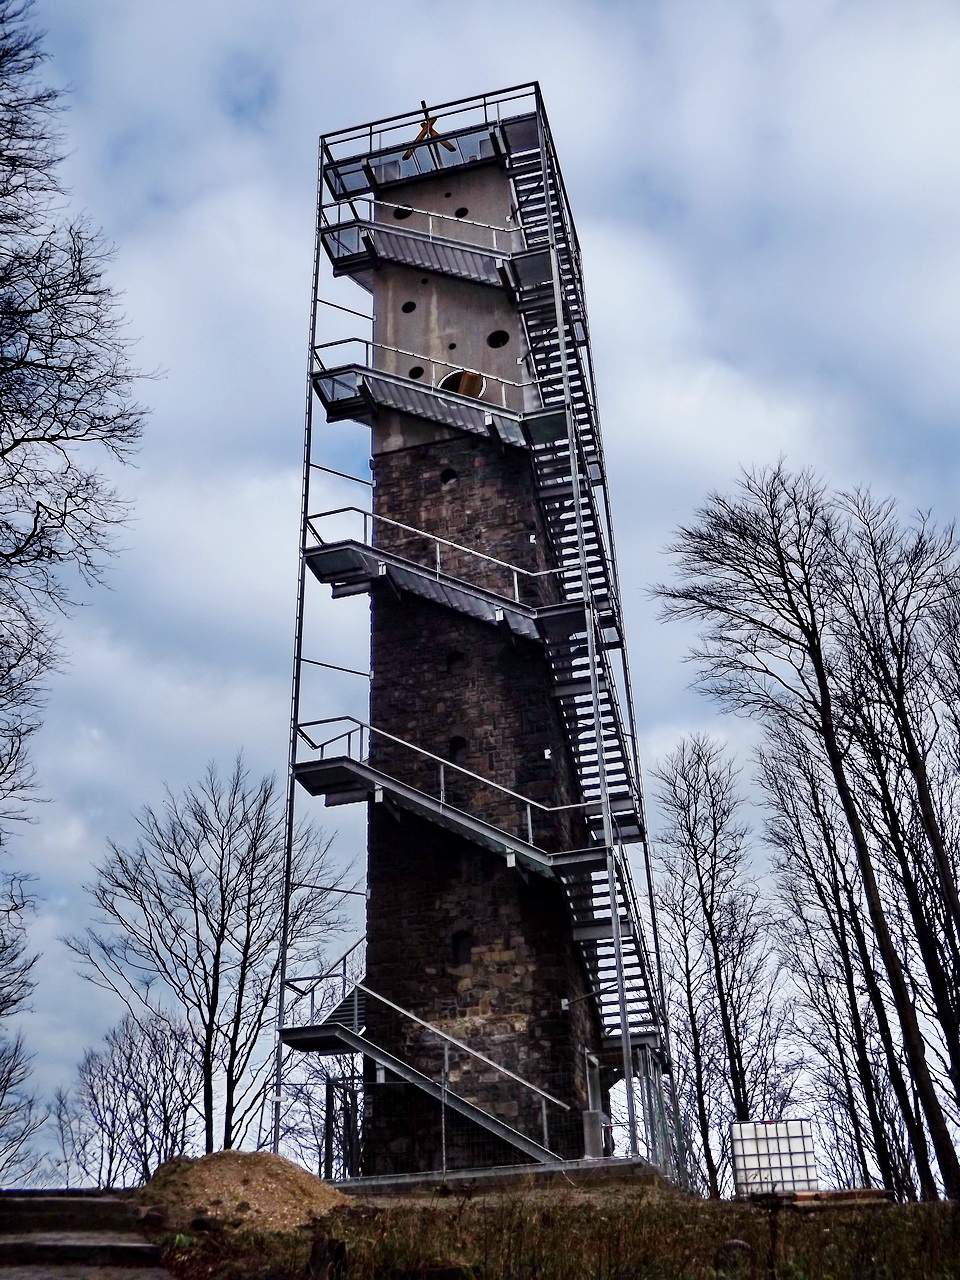 The old lookout tower of Galyatető have got two new floors